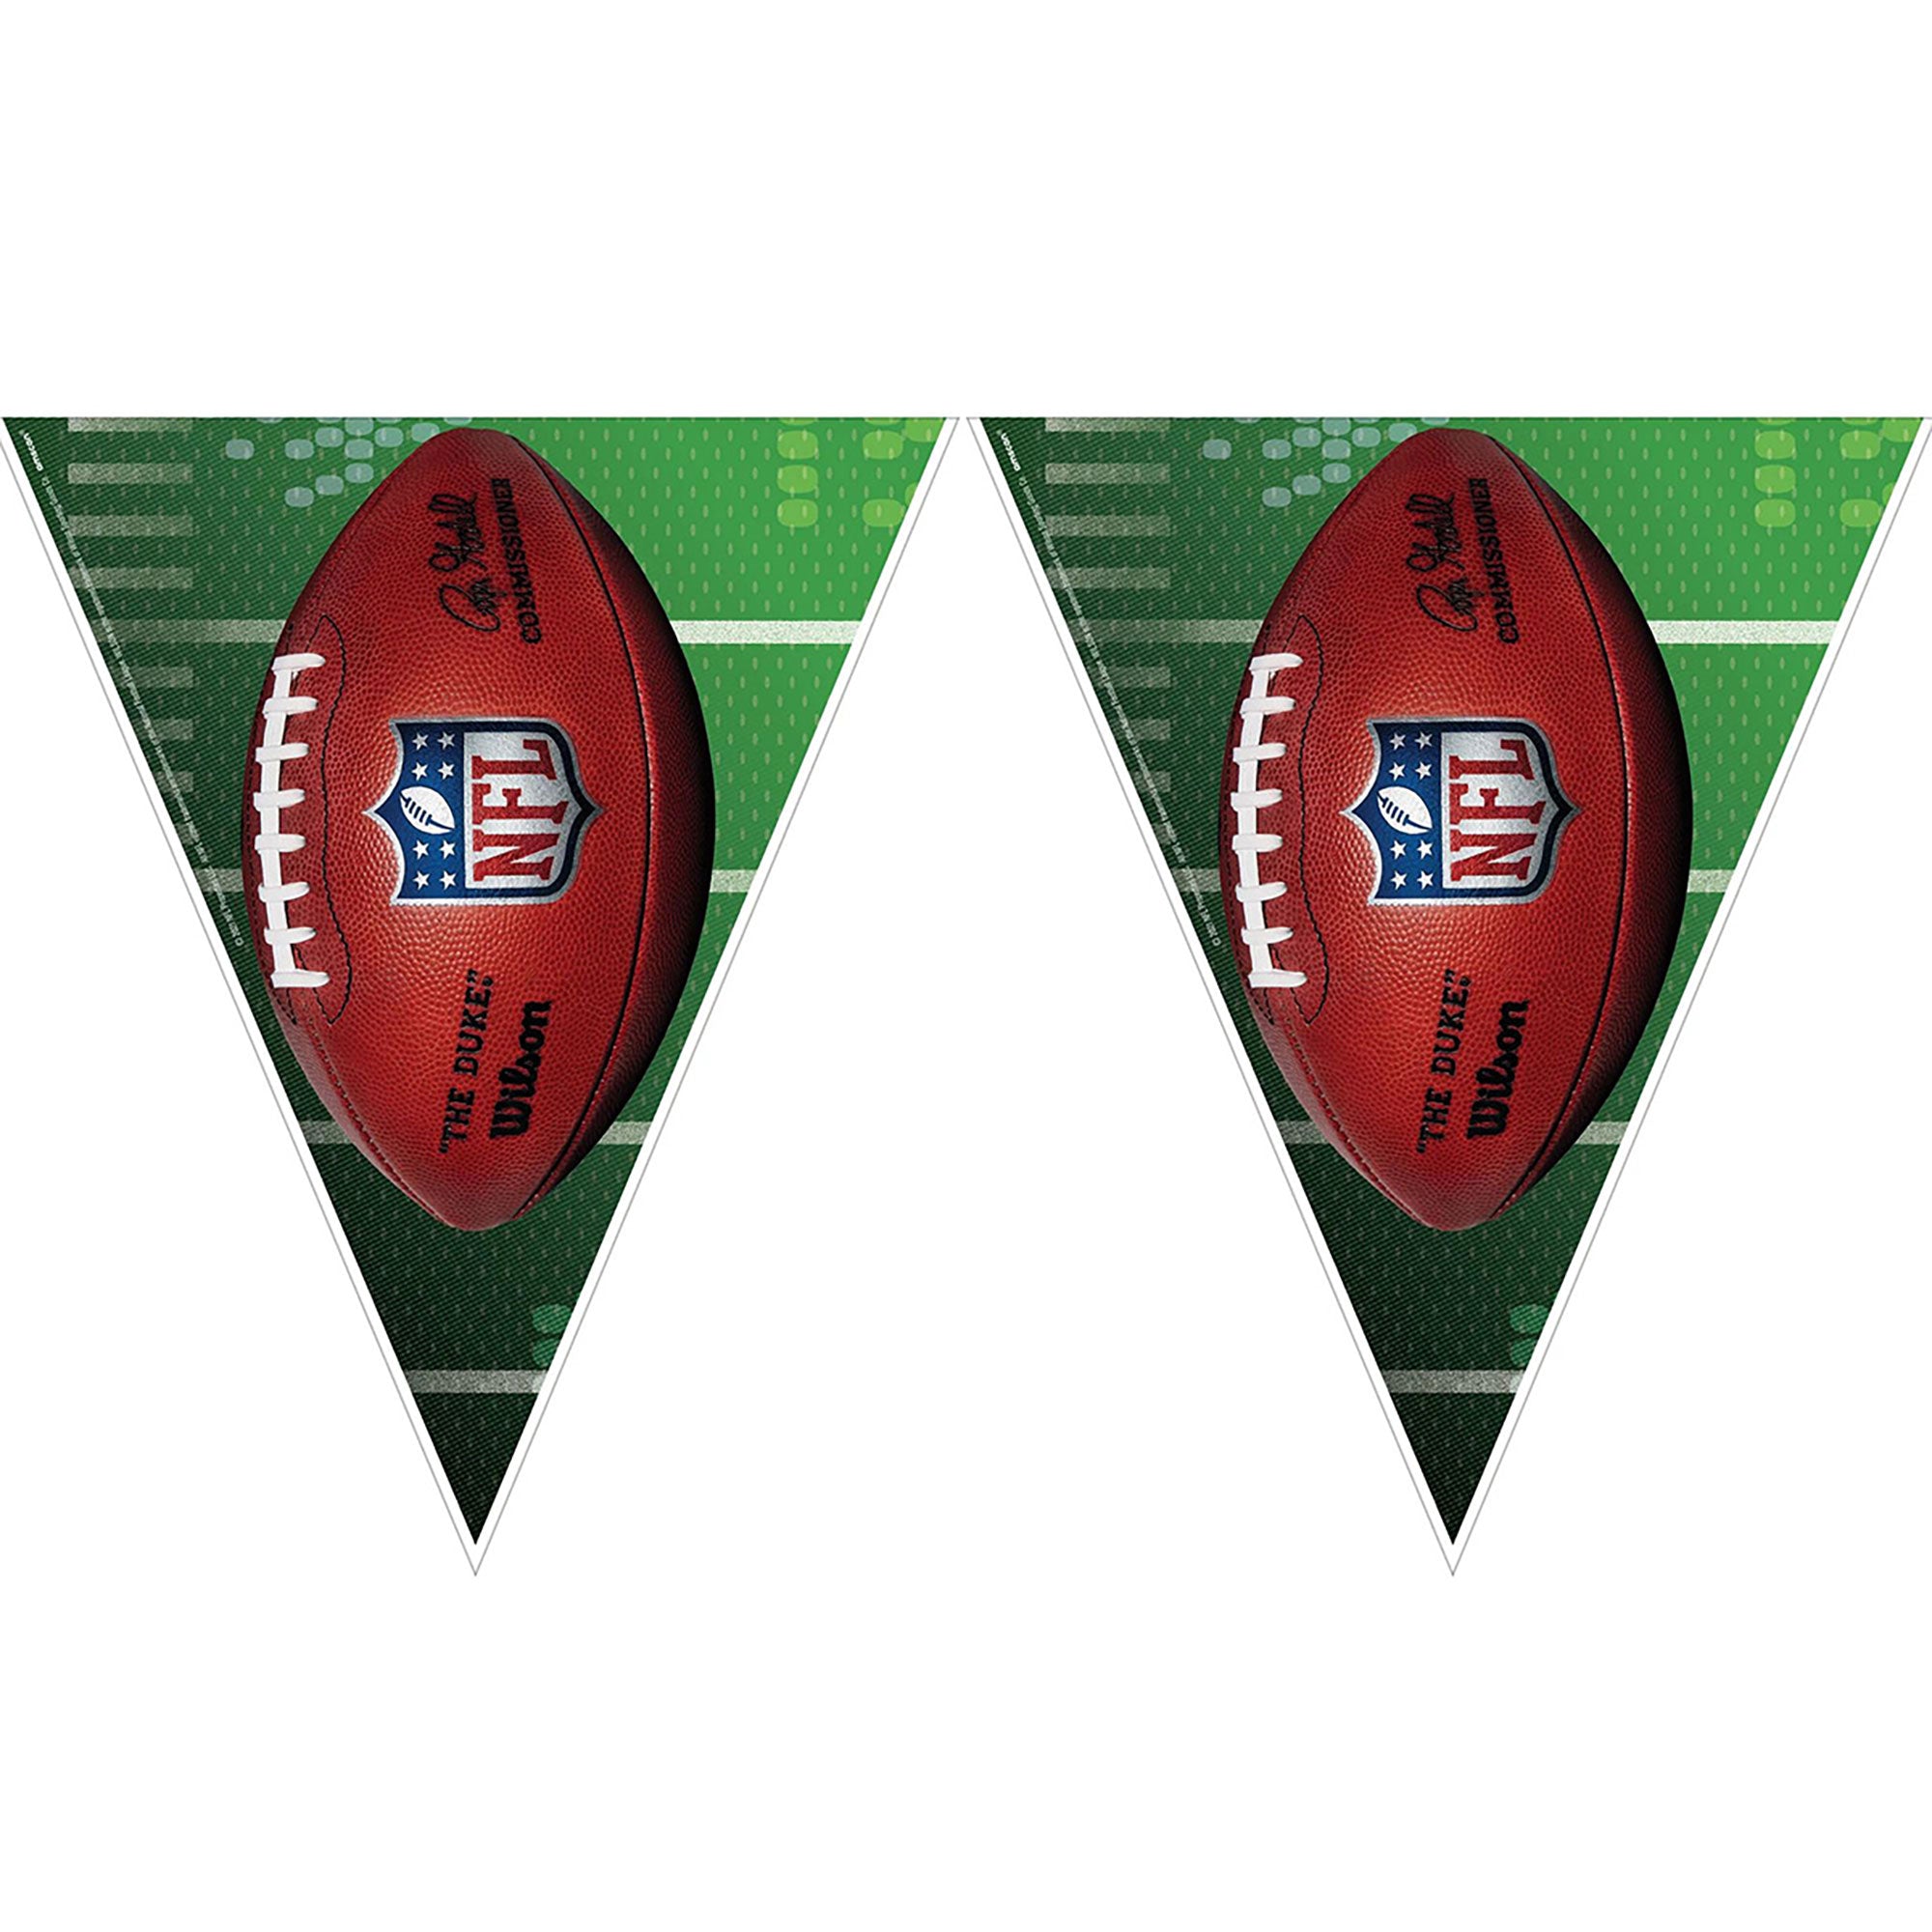 NFL Super Bowl Party Plastic Banner, 12 X 11 Inches, 1 Count